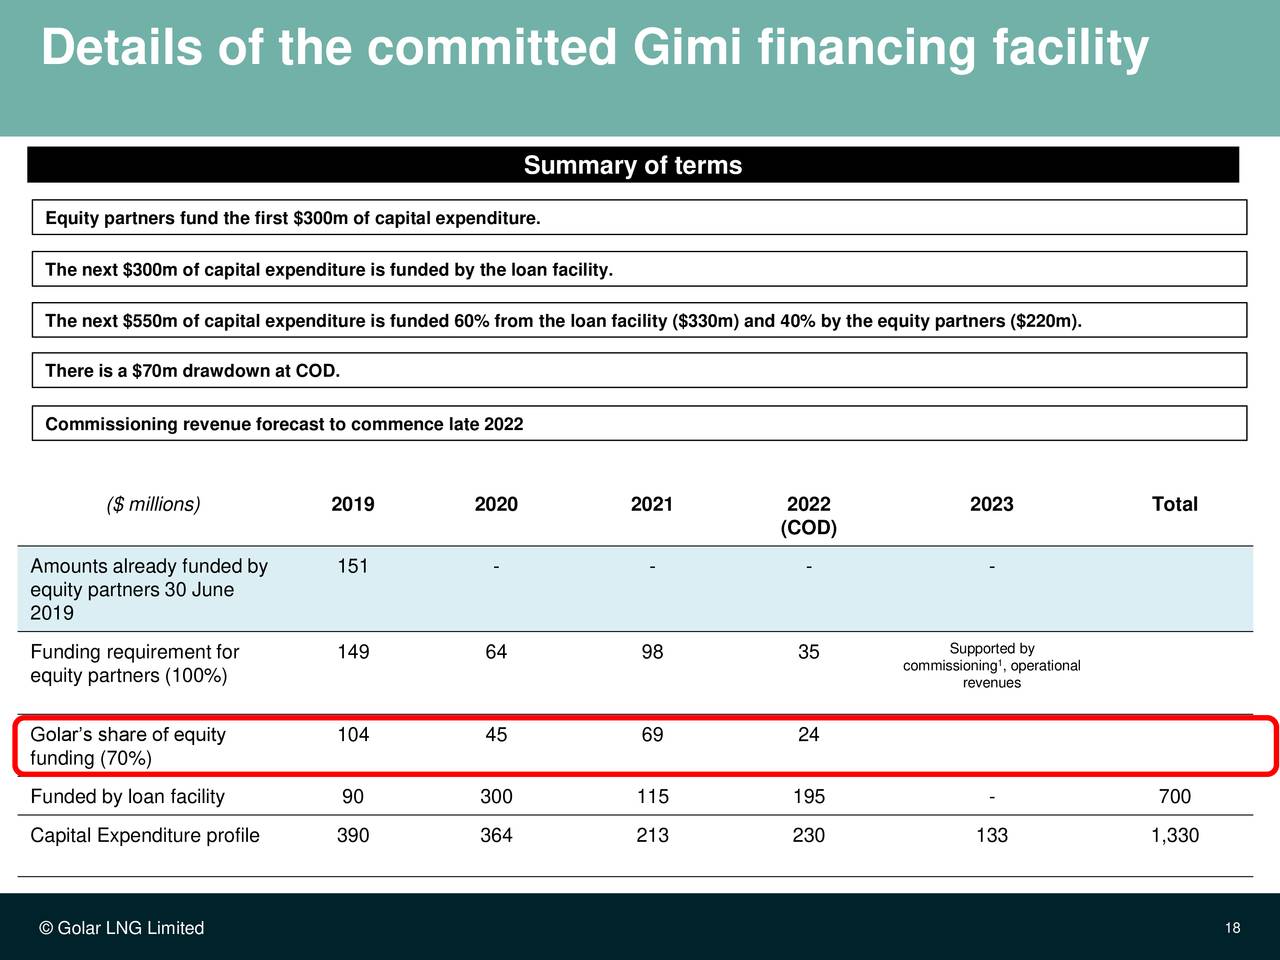 Details of the committed Gimi financing facility